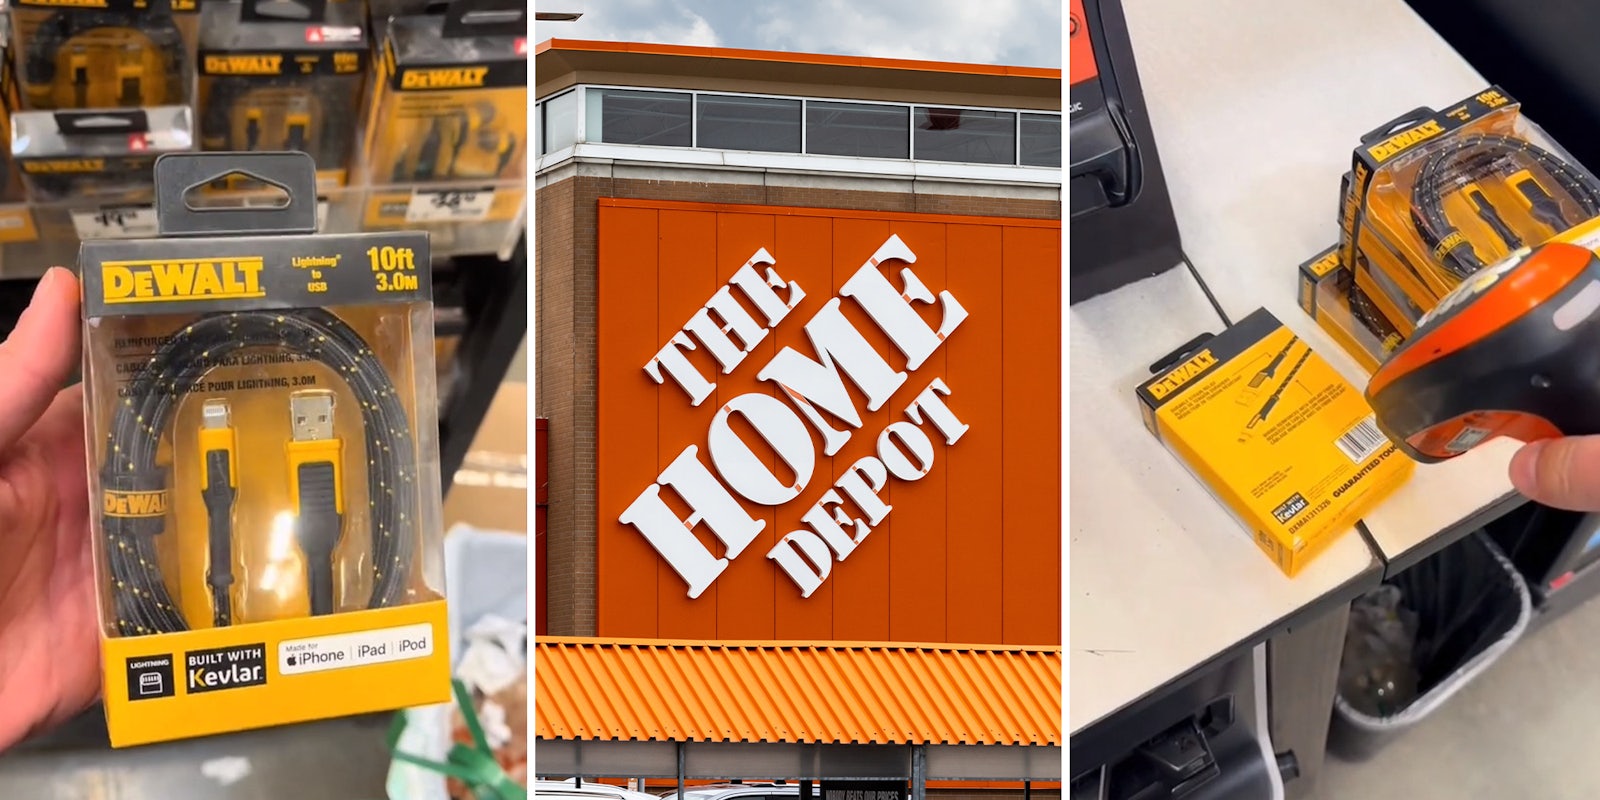 Home Depot customer discovers DeWalt items on sale for 1 cent with price scanner